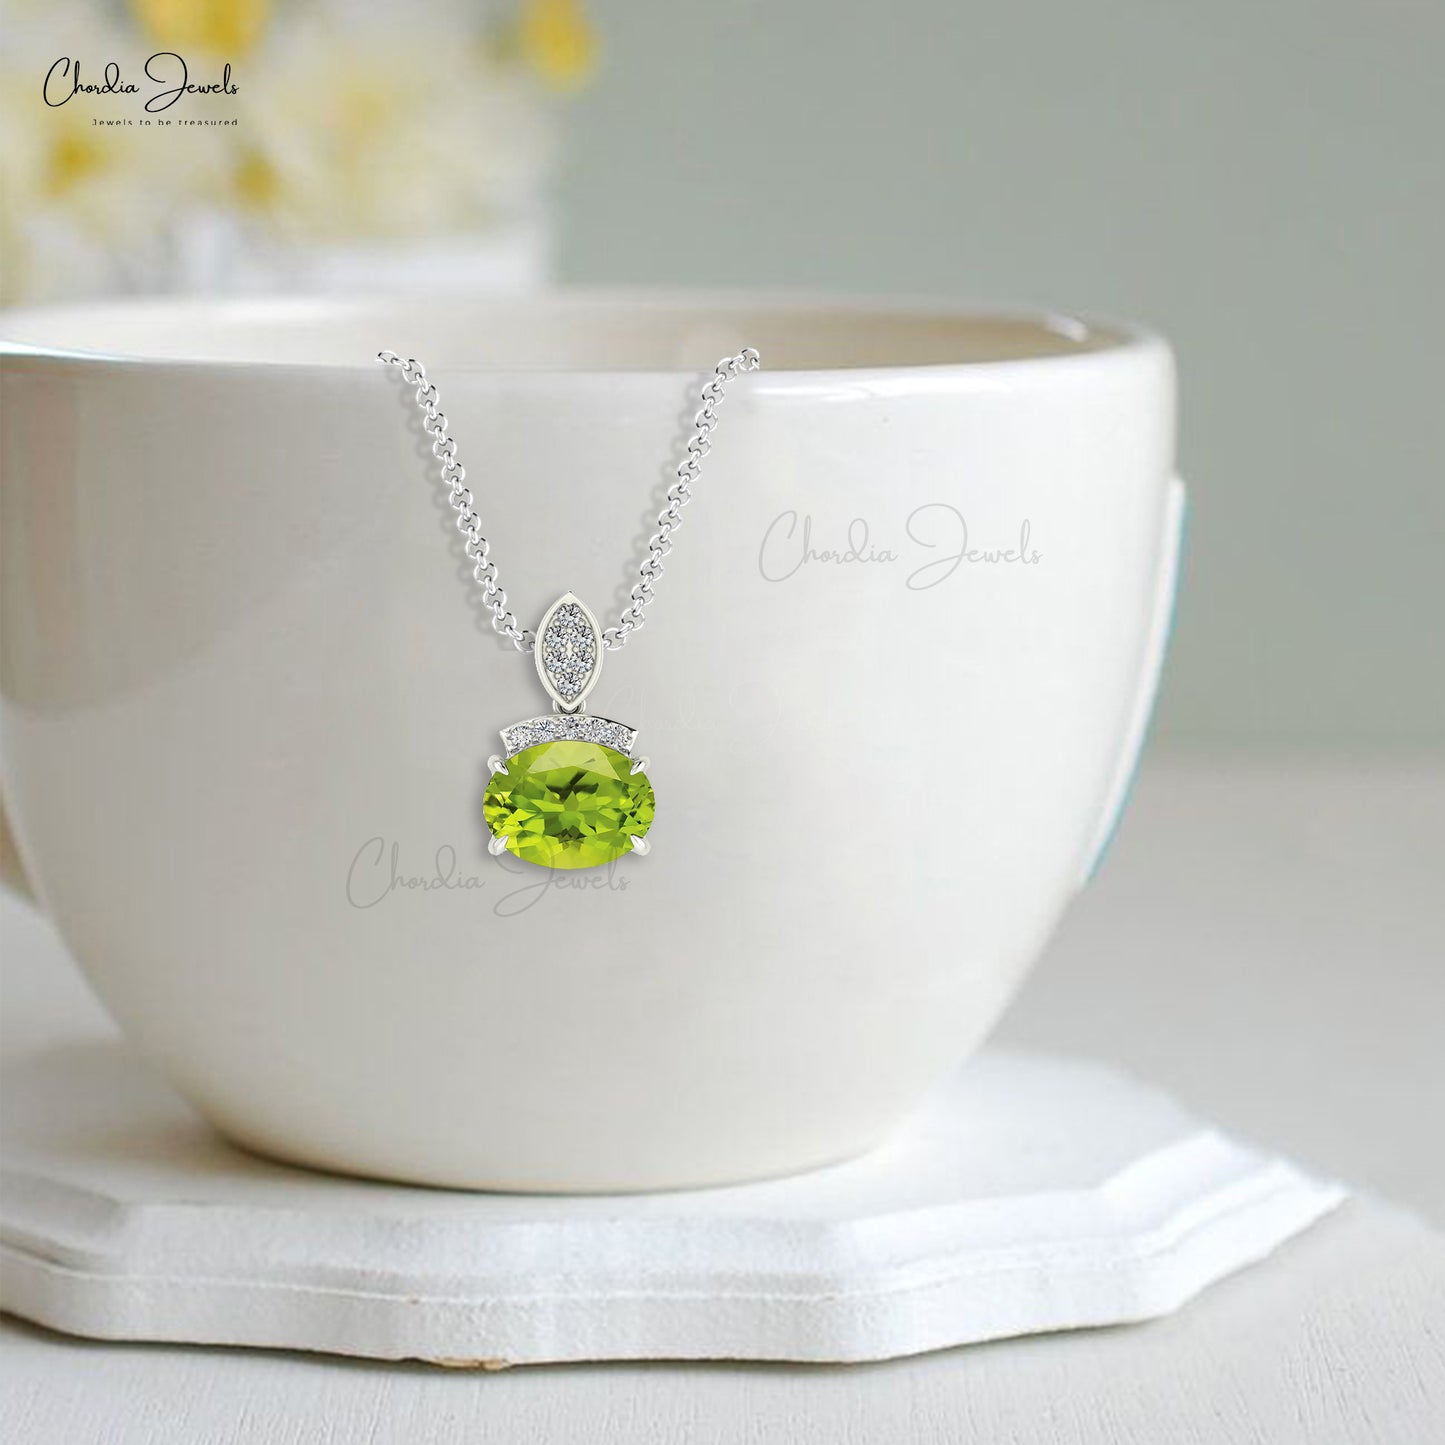 Load image into Gallery viewer, Dainty Pendant With Peridot Gemstone 14k Solid Gold Diamond Accents Pendant For Birthday Gift
